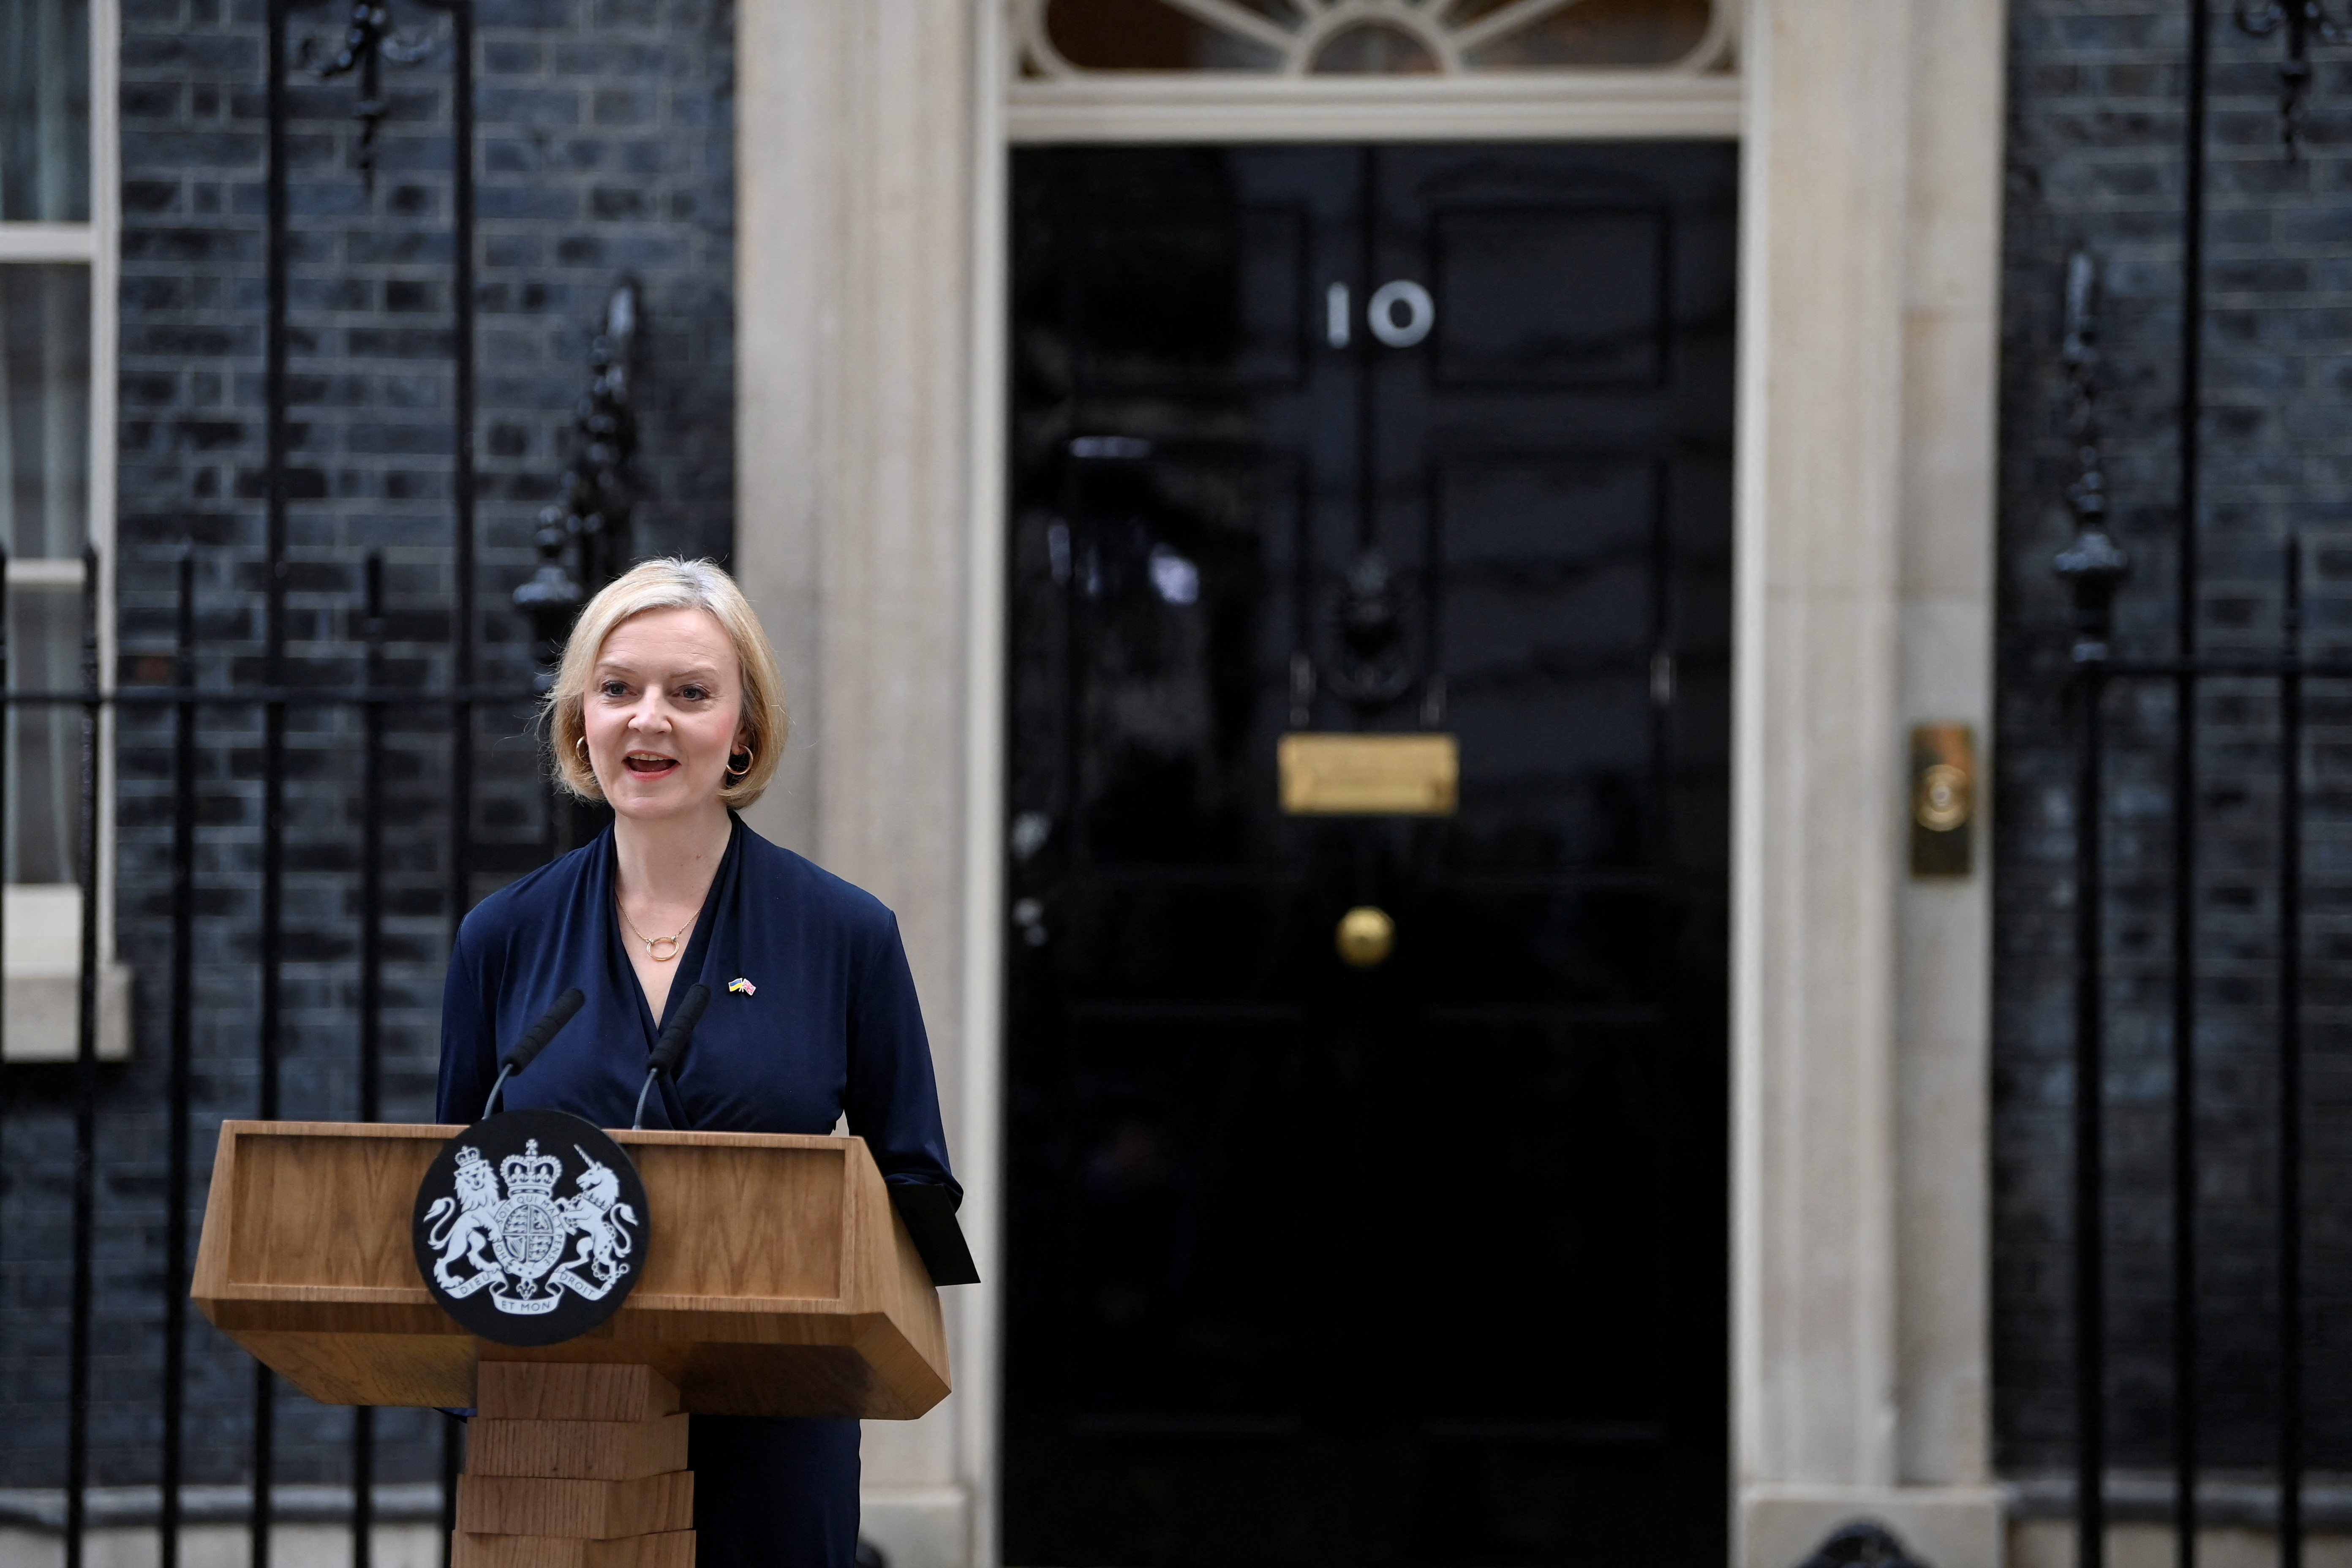 British Prime Minister Liz Truss gives statement outside Number 10 Downing Street, London